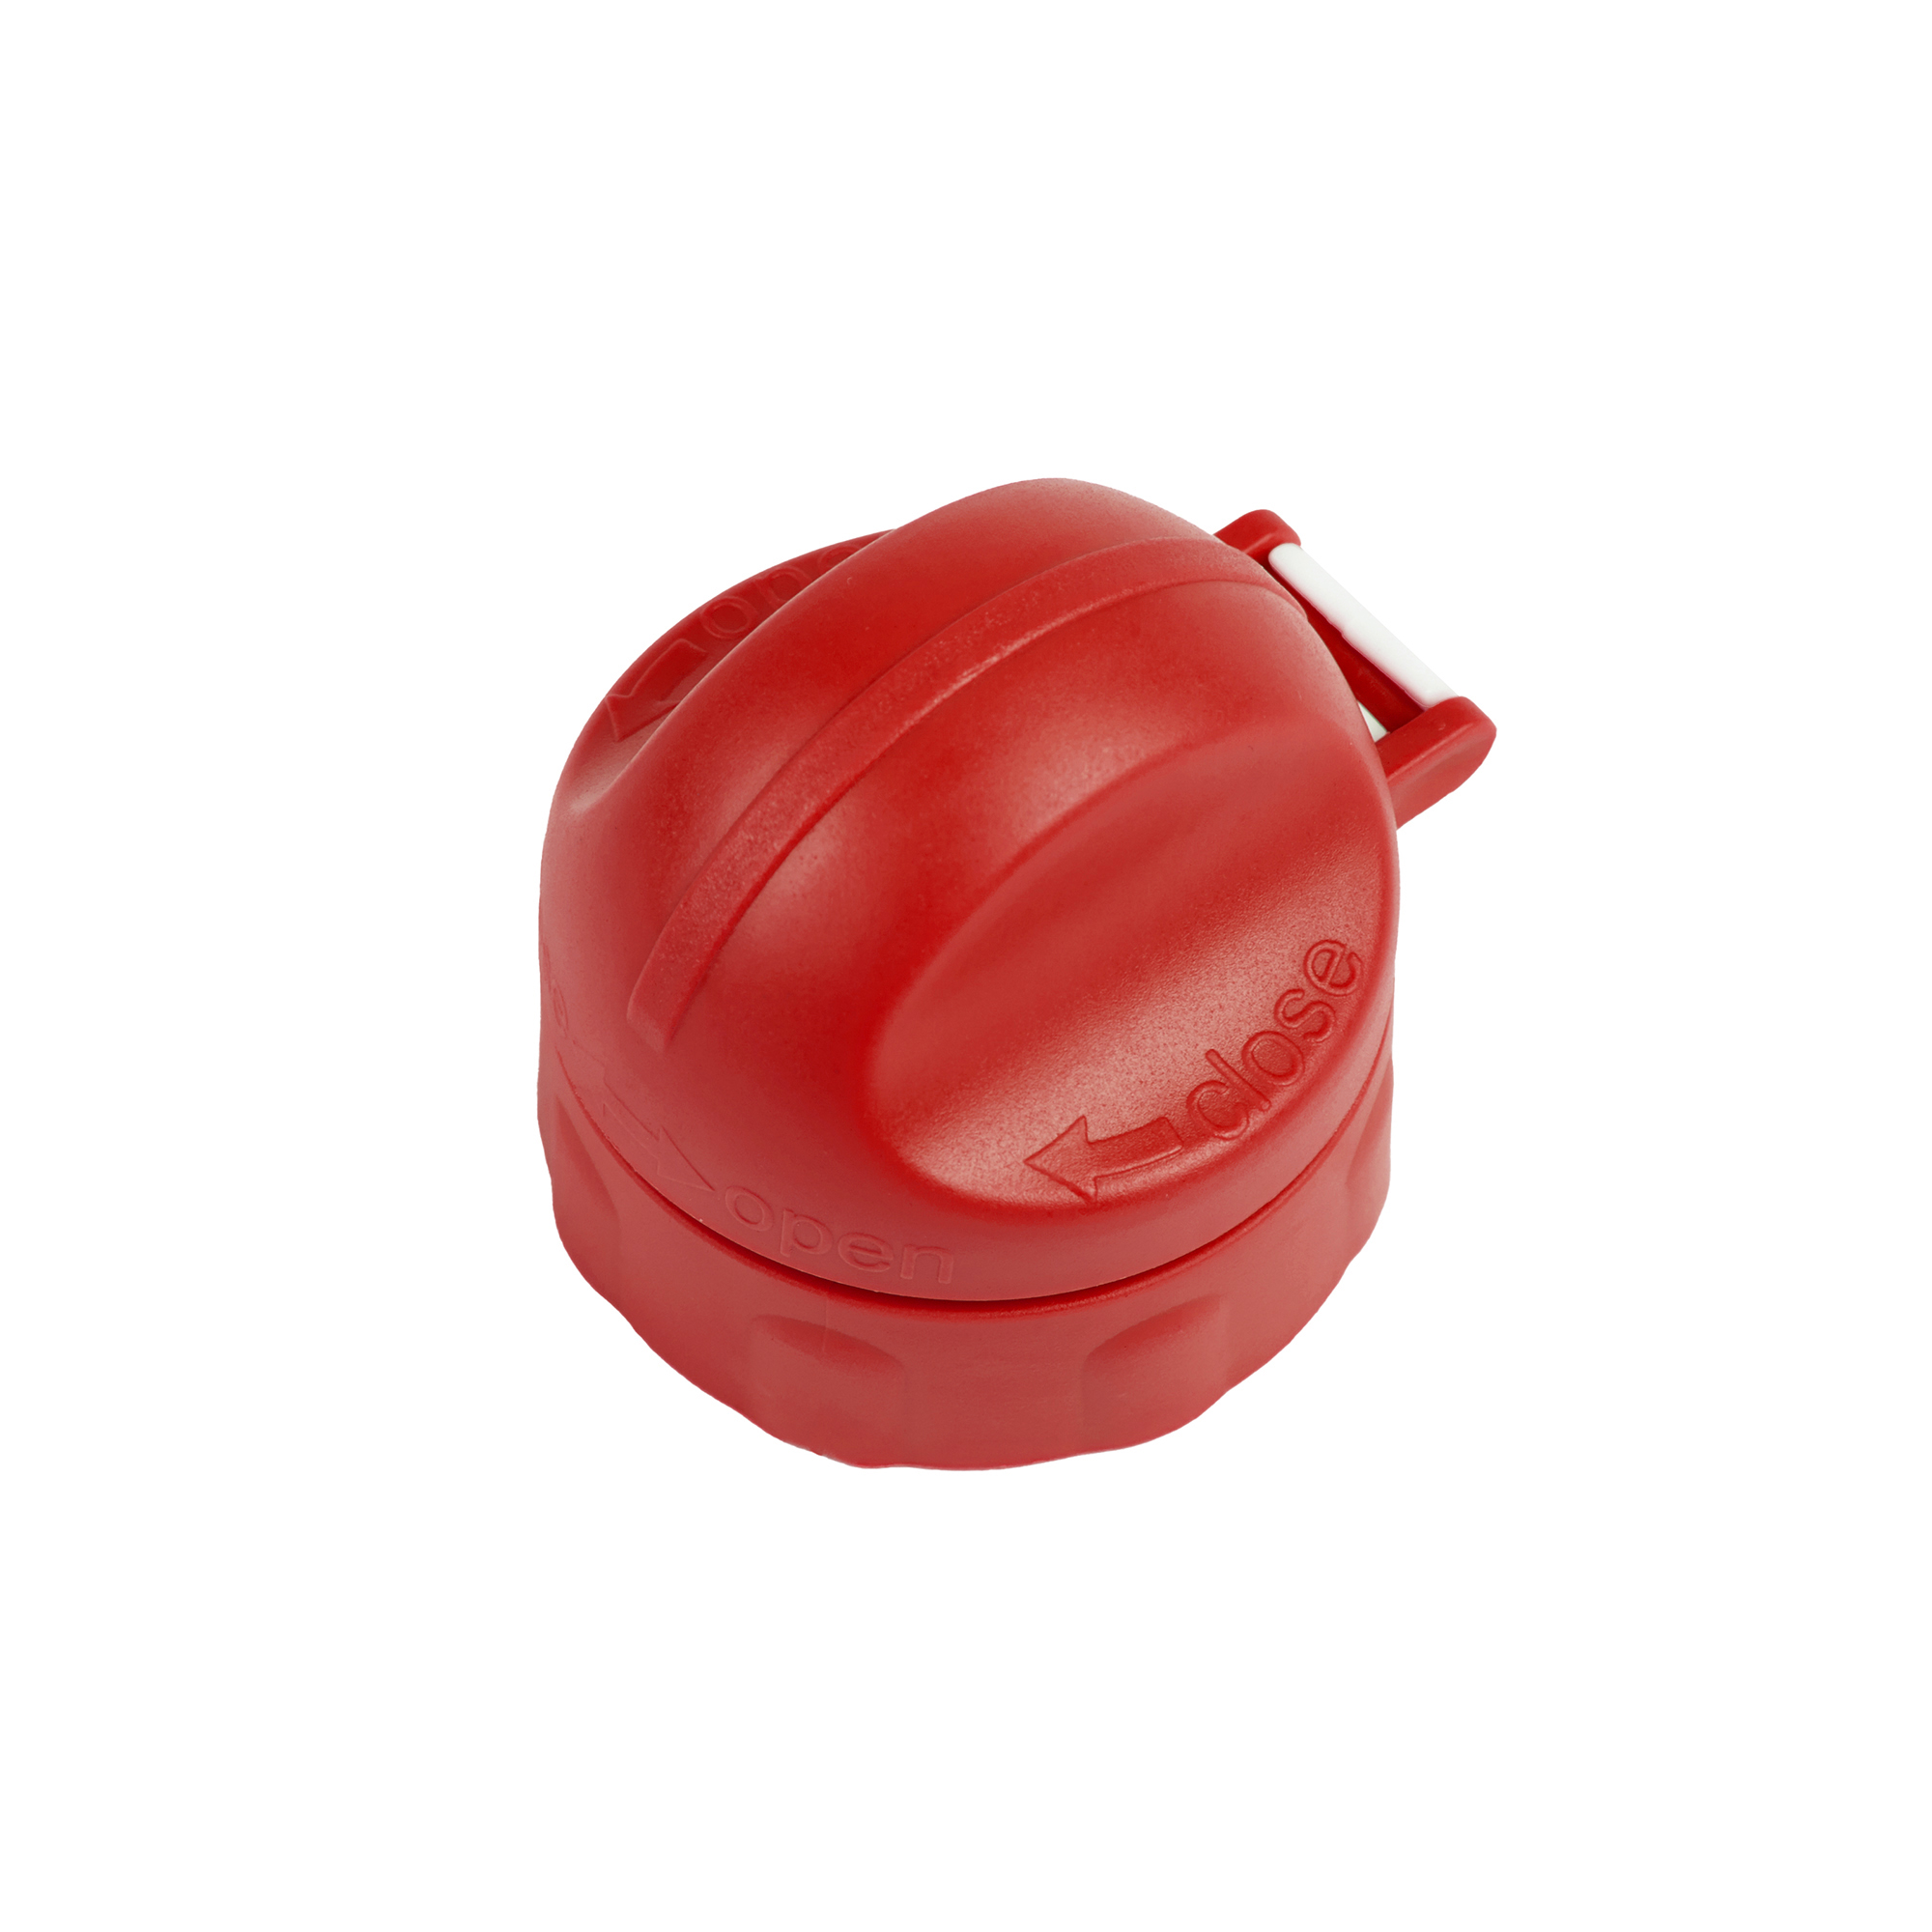 Lid for drinking bottles, red